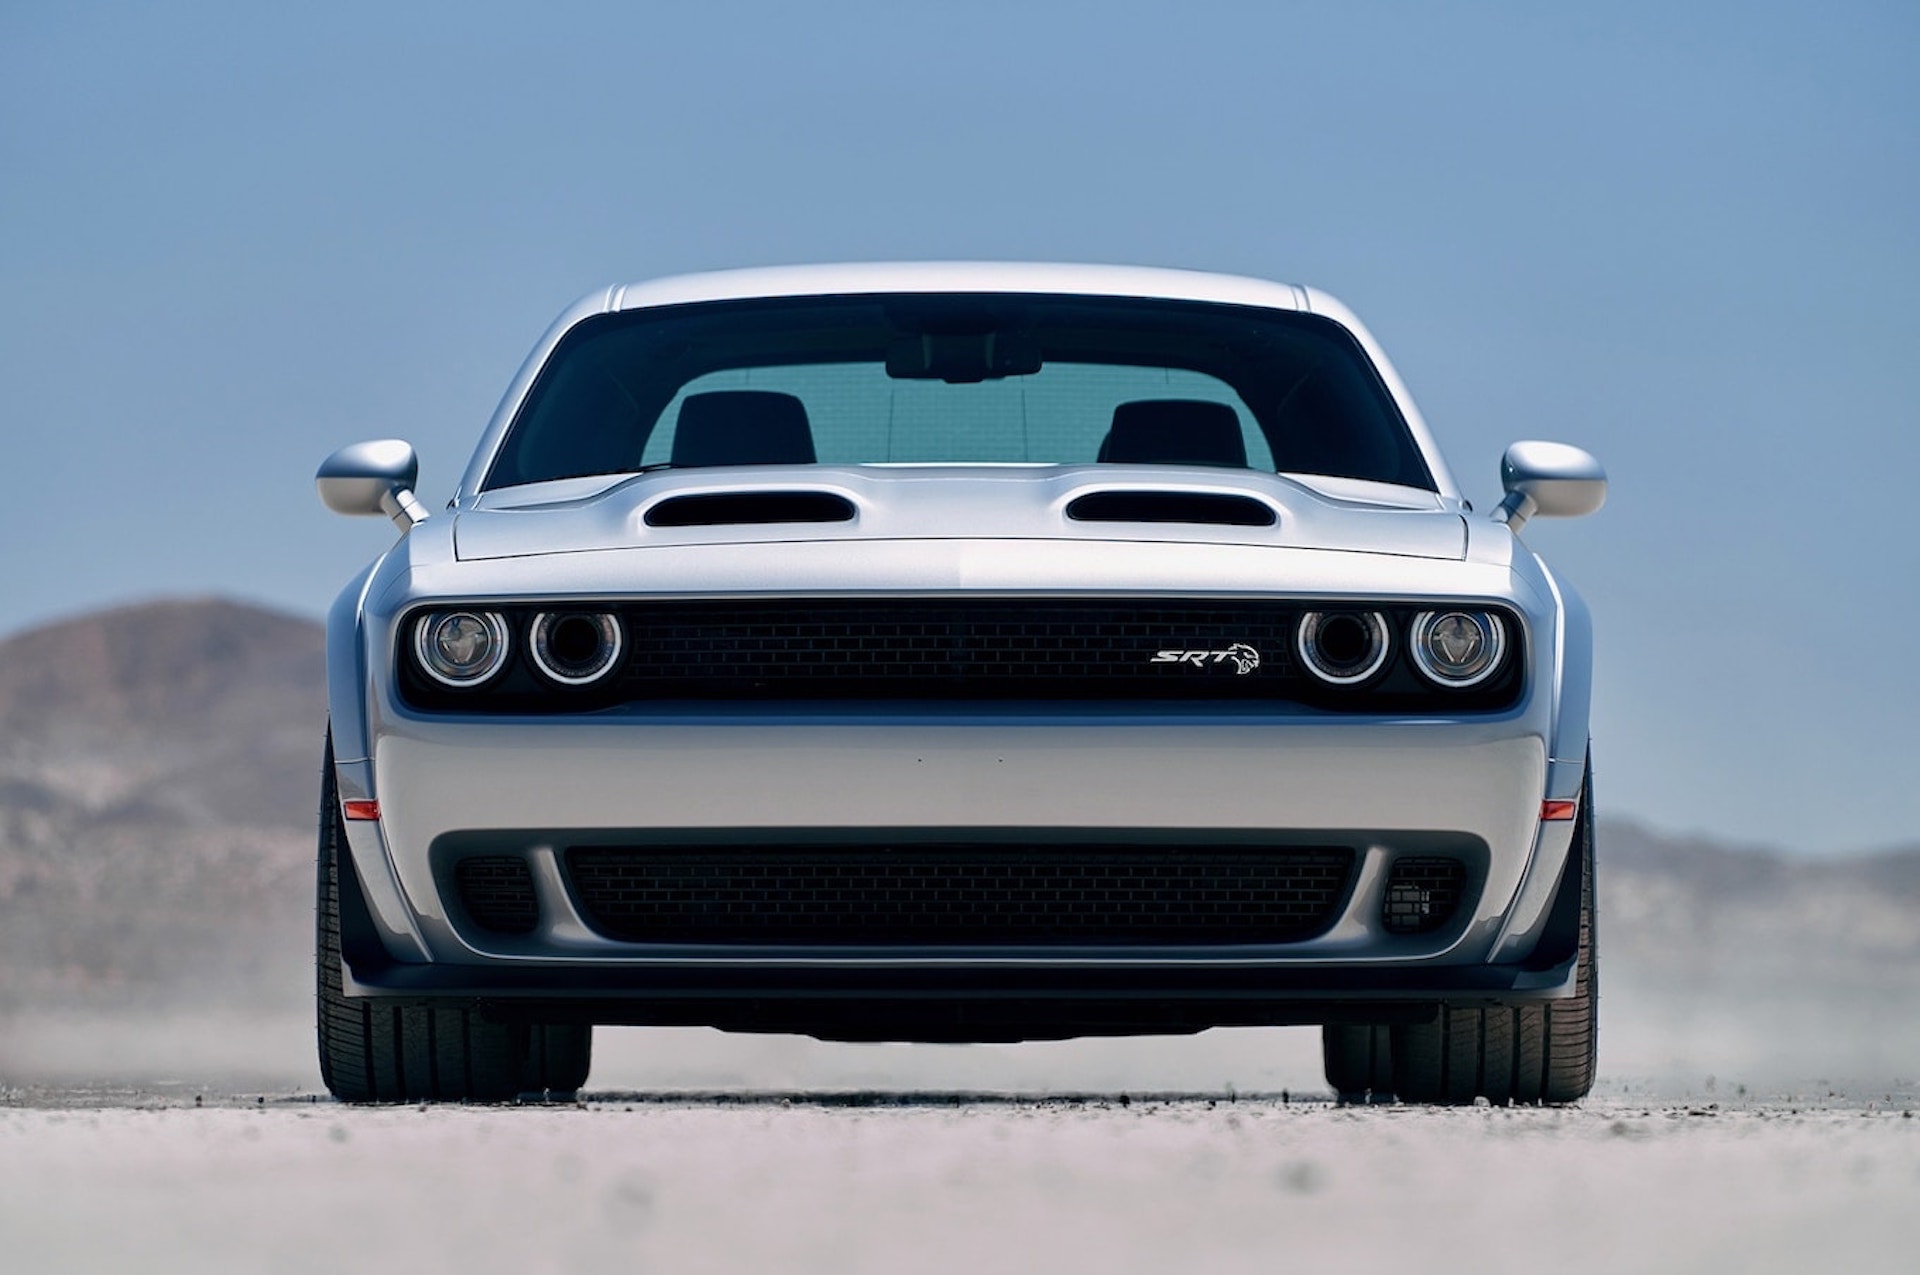 Hennessey has 1,035-hp package for Dodge Challenger SRT Hellcat Redeye